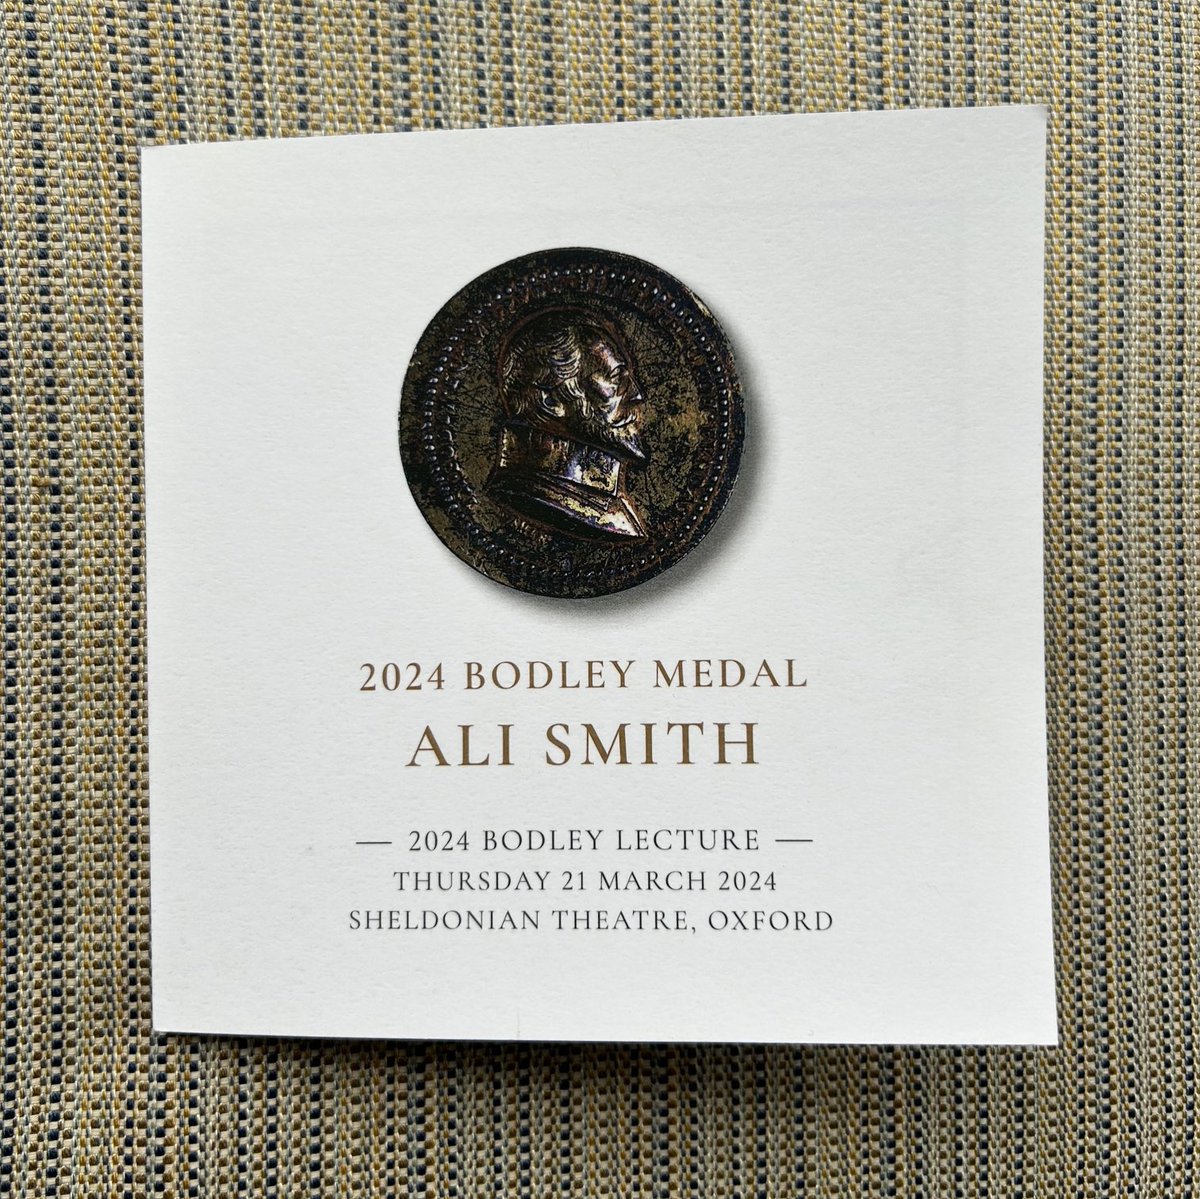 Congratulations to ALI SMITH! — awarded the 2024 Bodley Medal in Oxford last night —